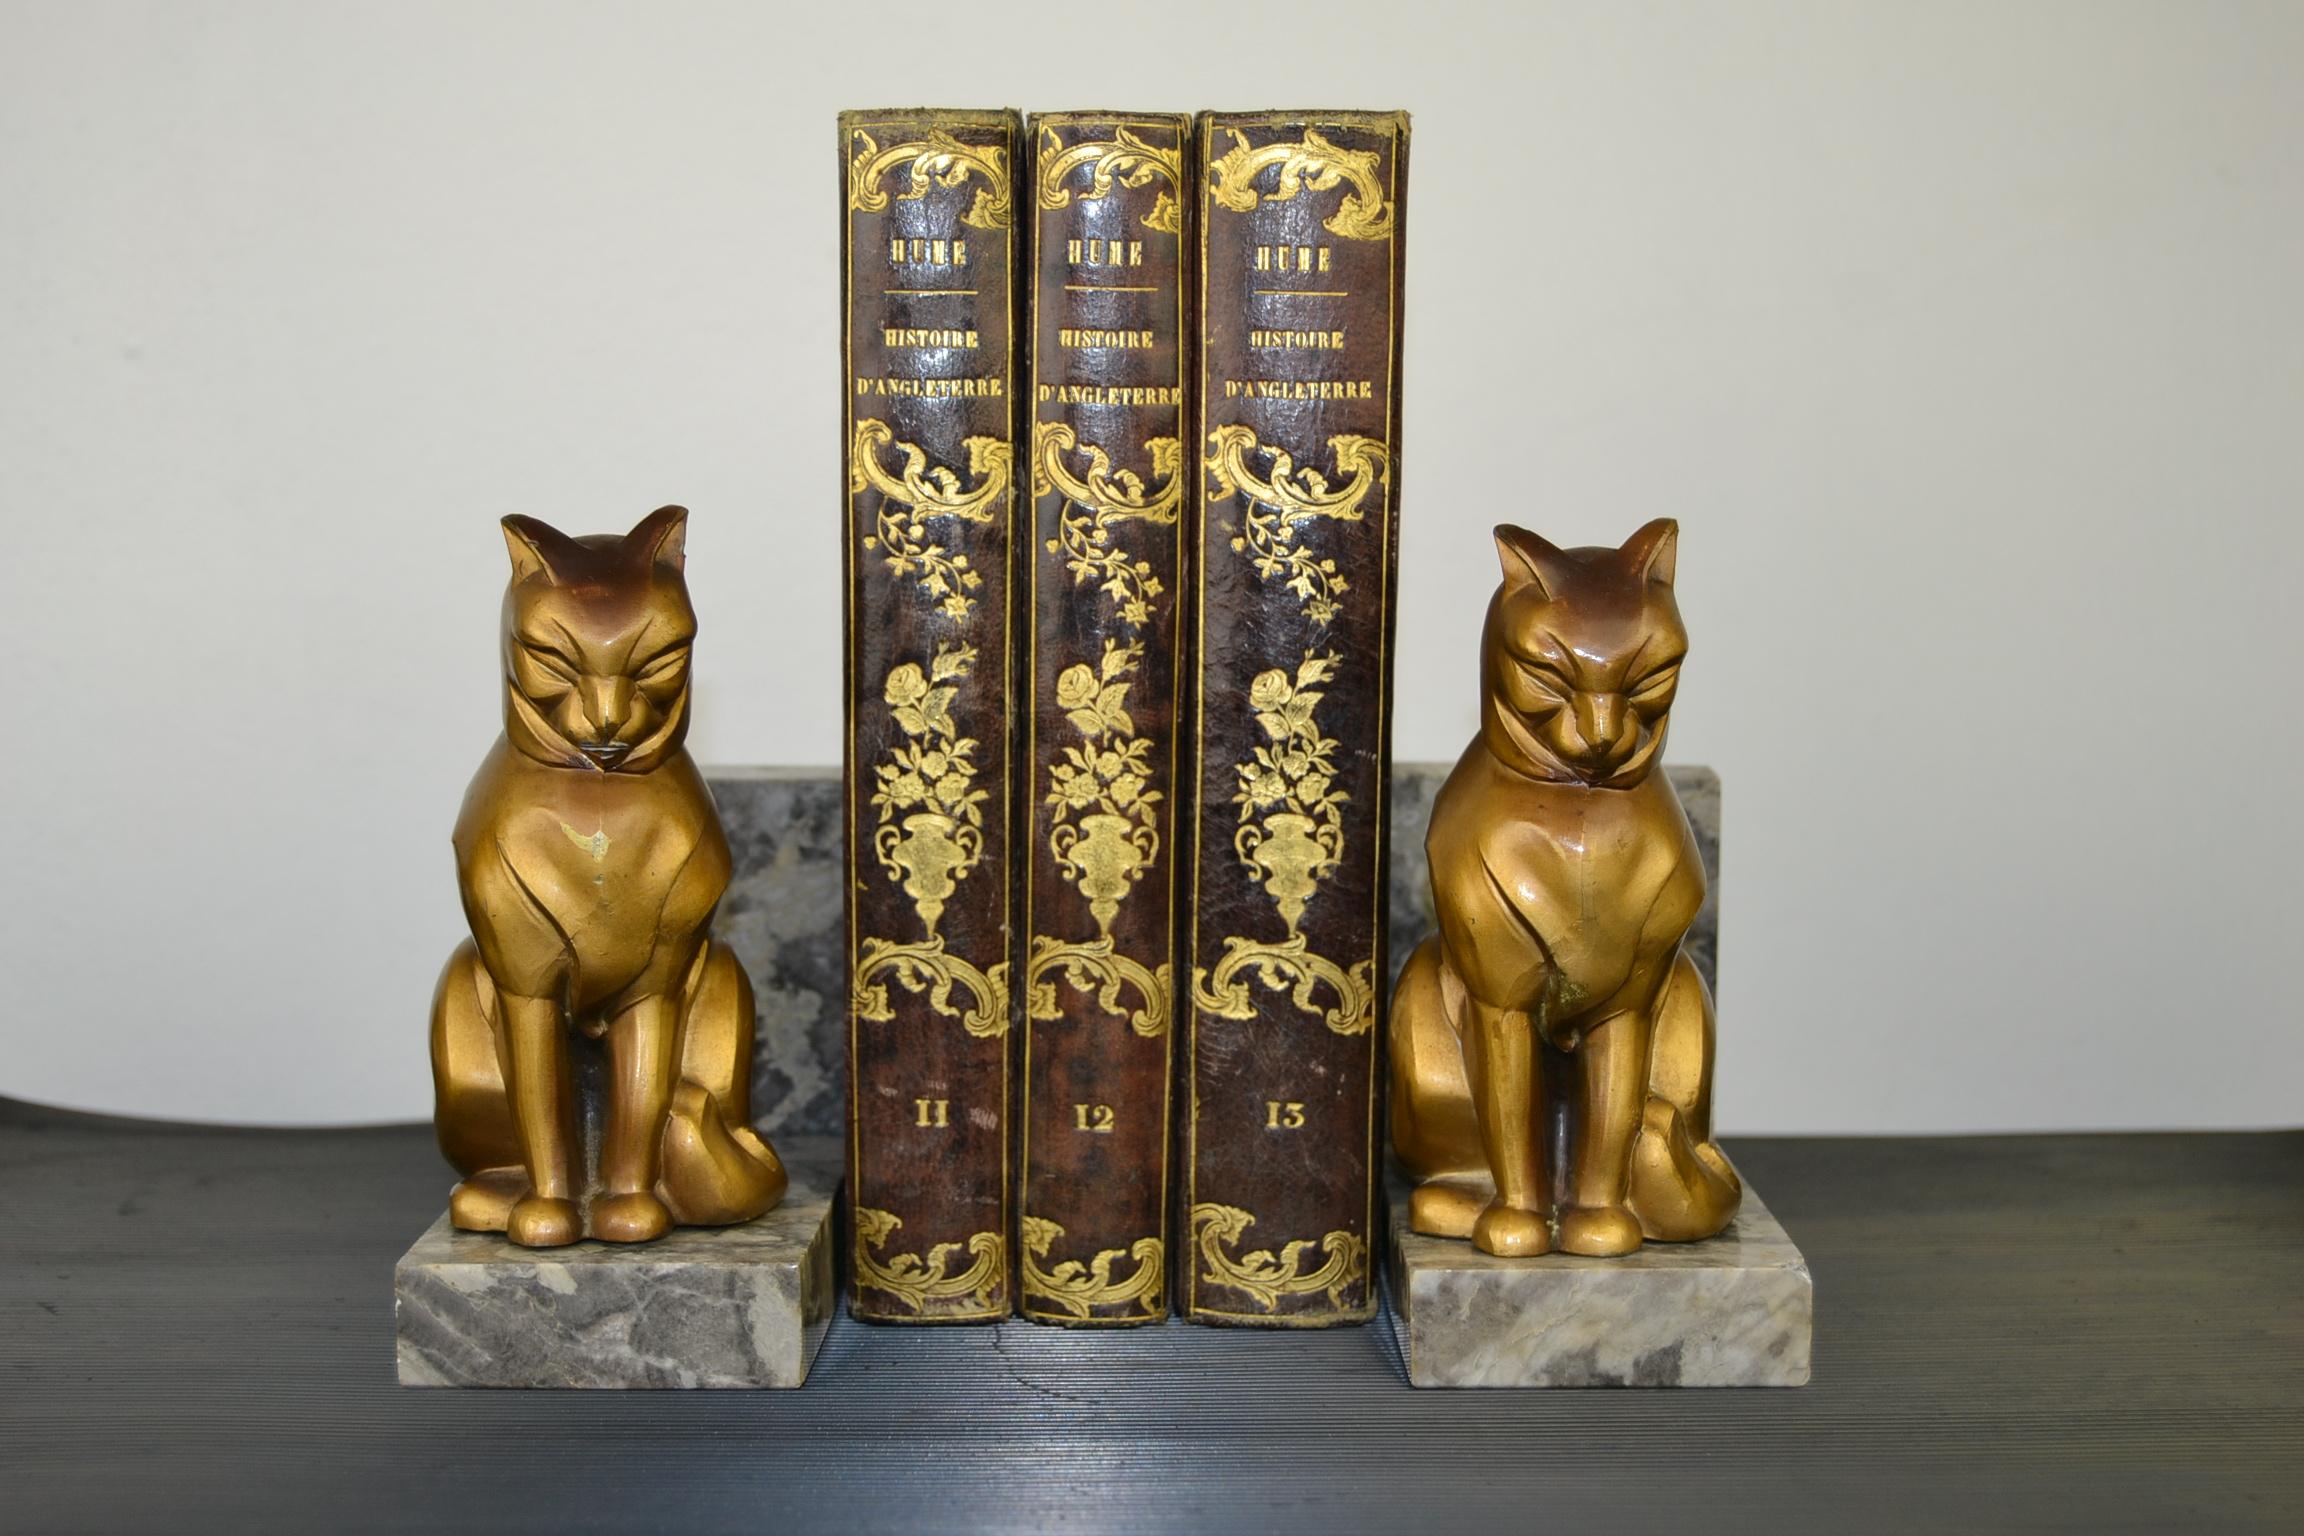 Stylish Art Deco bookends with cats. These French cubist bookends are signed by Franjou and date 1930s .
The cats made of gold patinated metal, spelter are mounted on marble base. 

The bookends are in fair condition, they have traces of age and